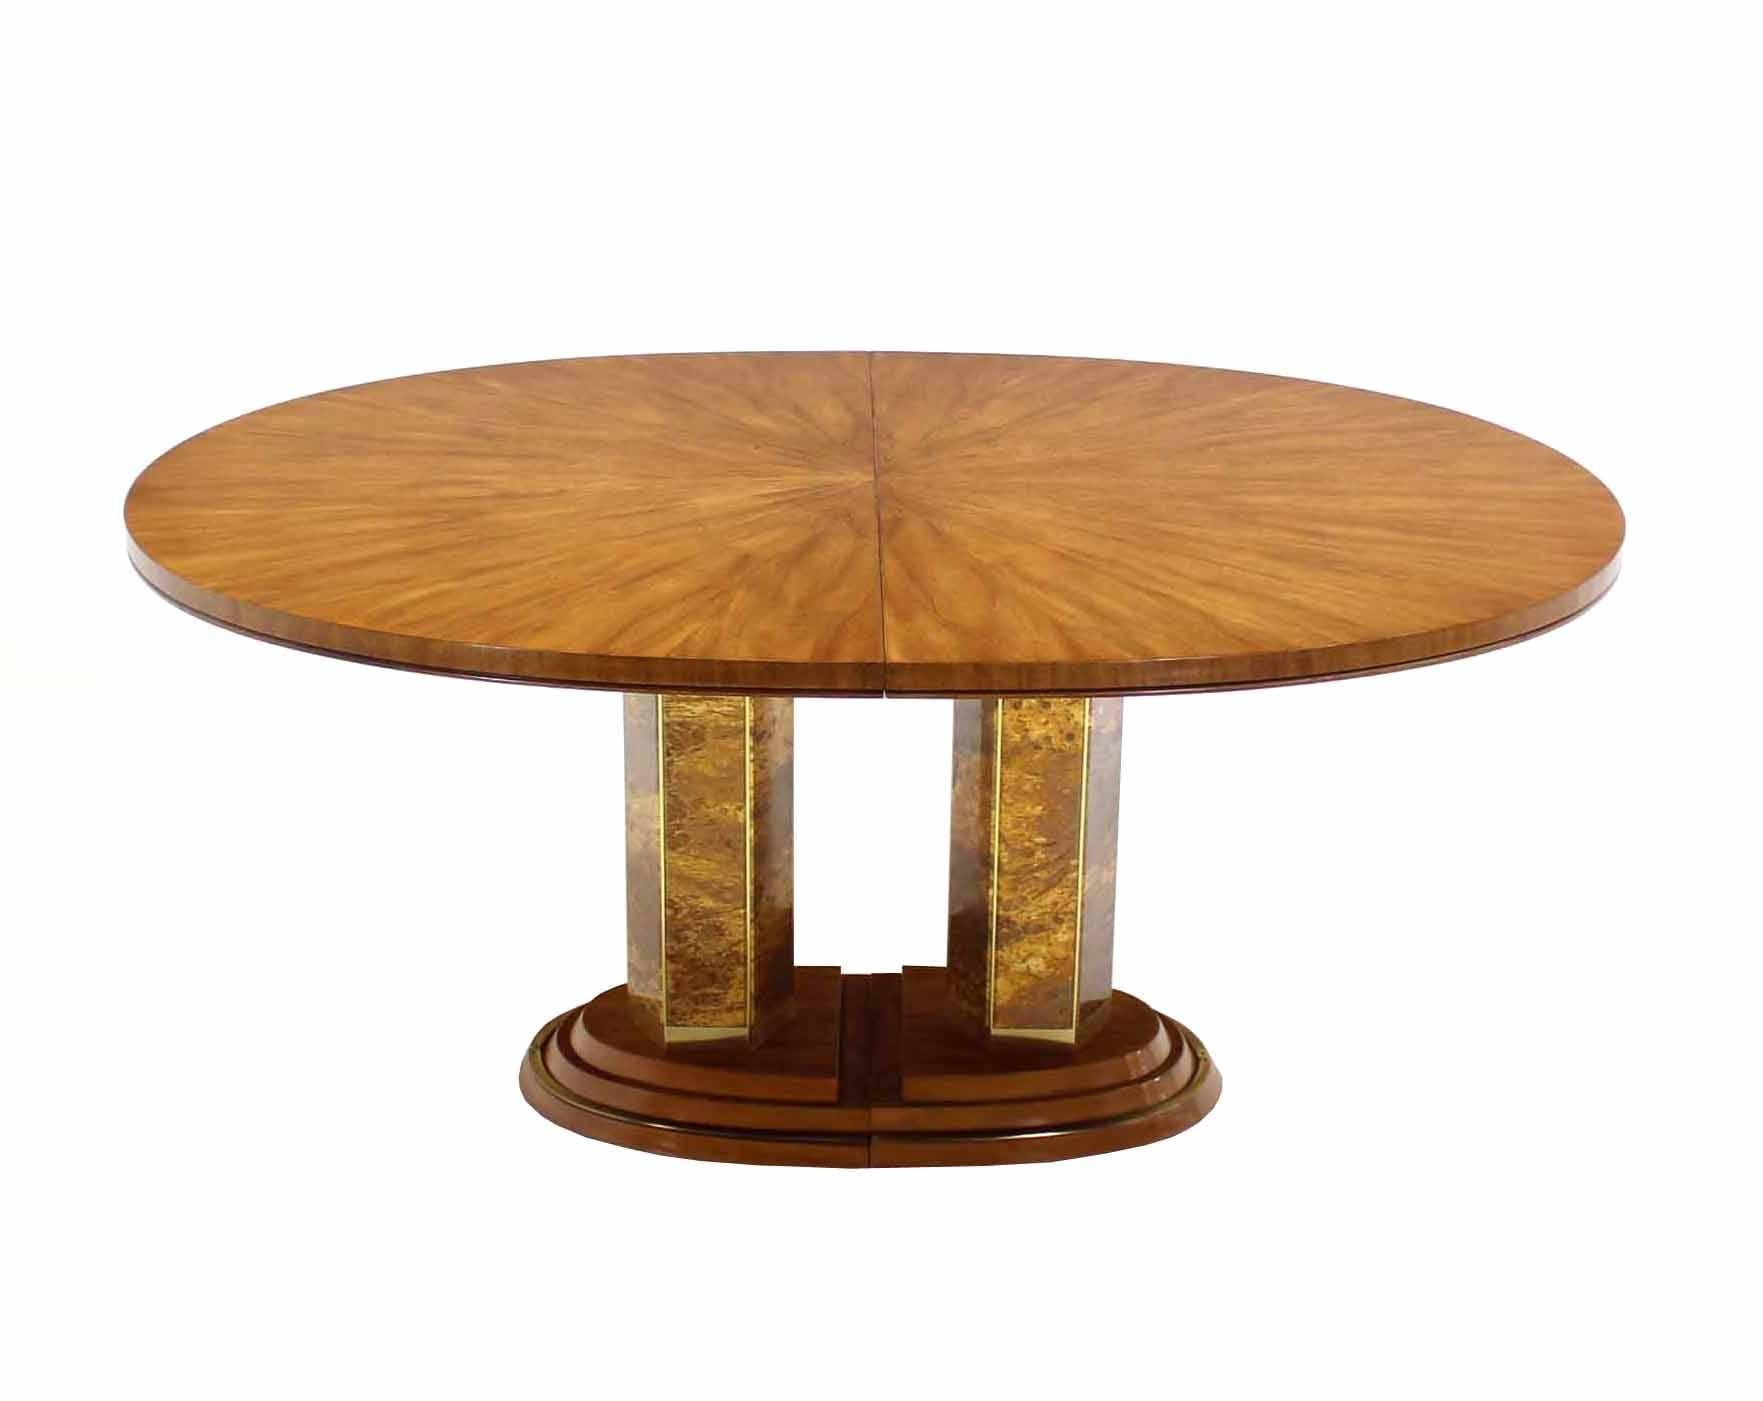 Brass Oval Dining Satinwood Table by Drexel w/ Two Extension Boards Leafs